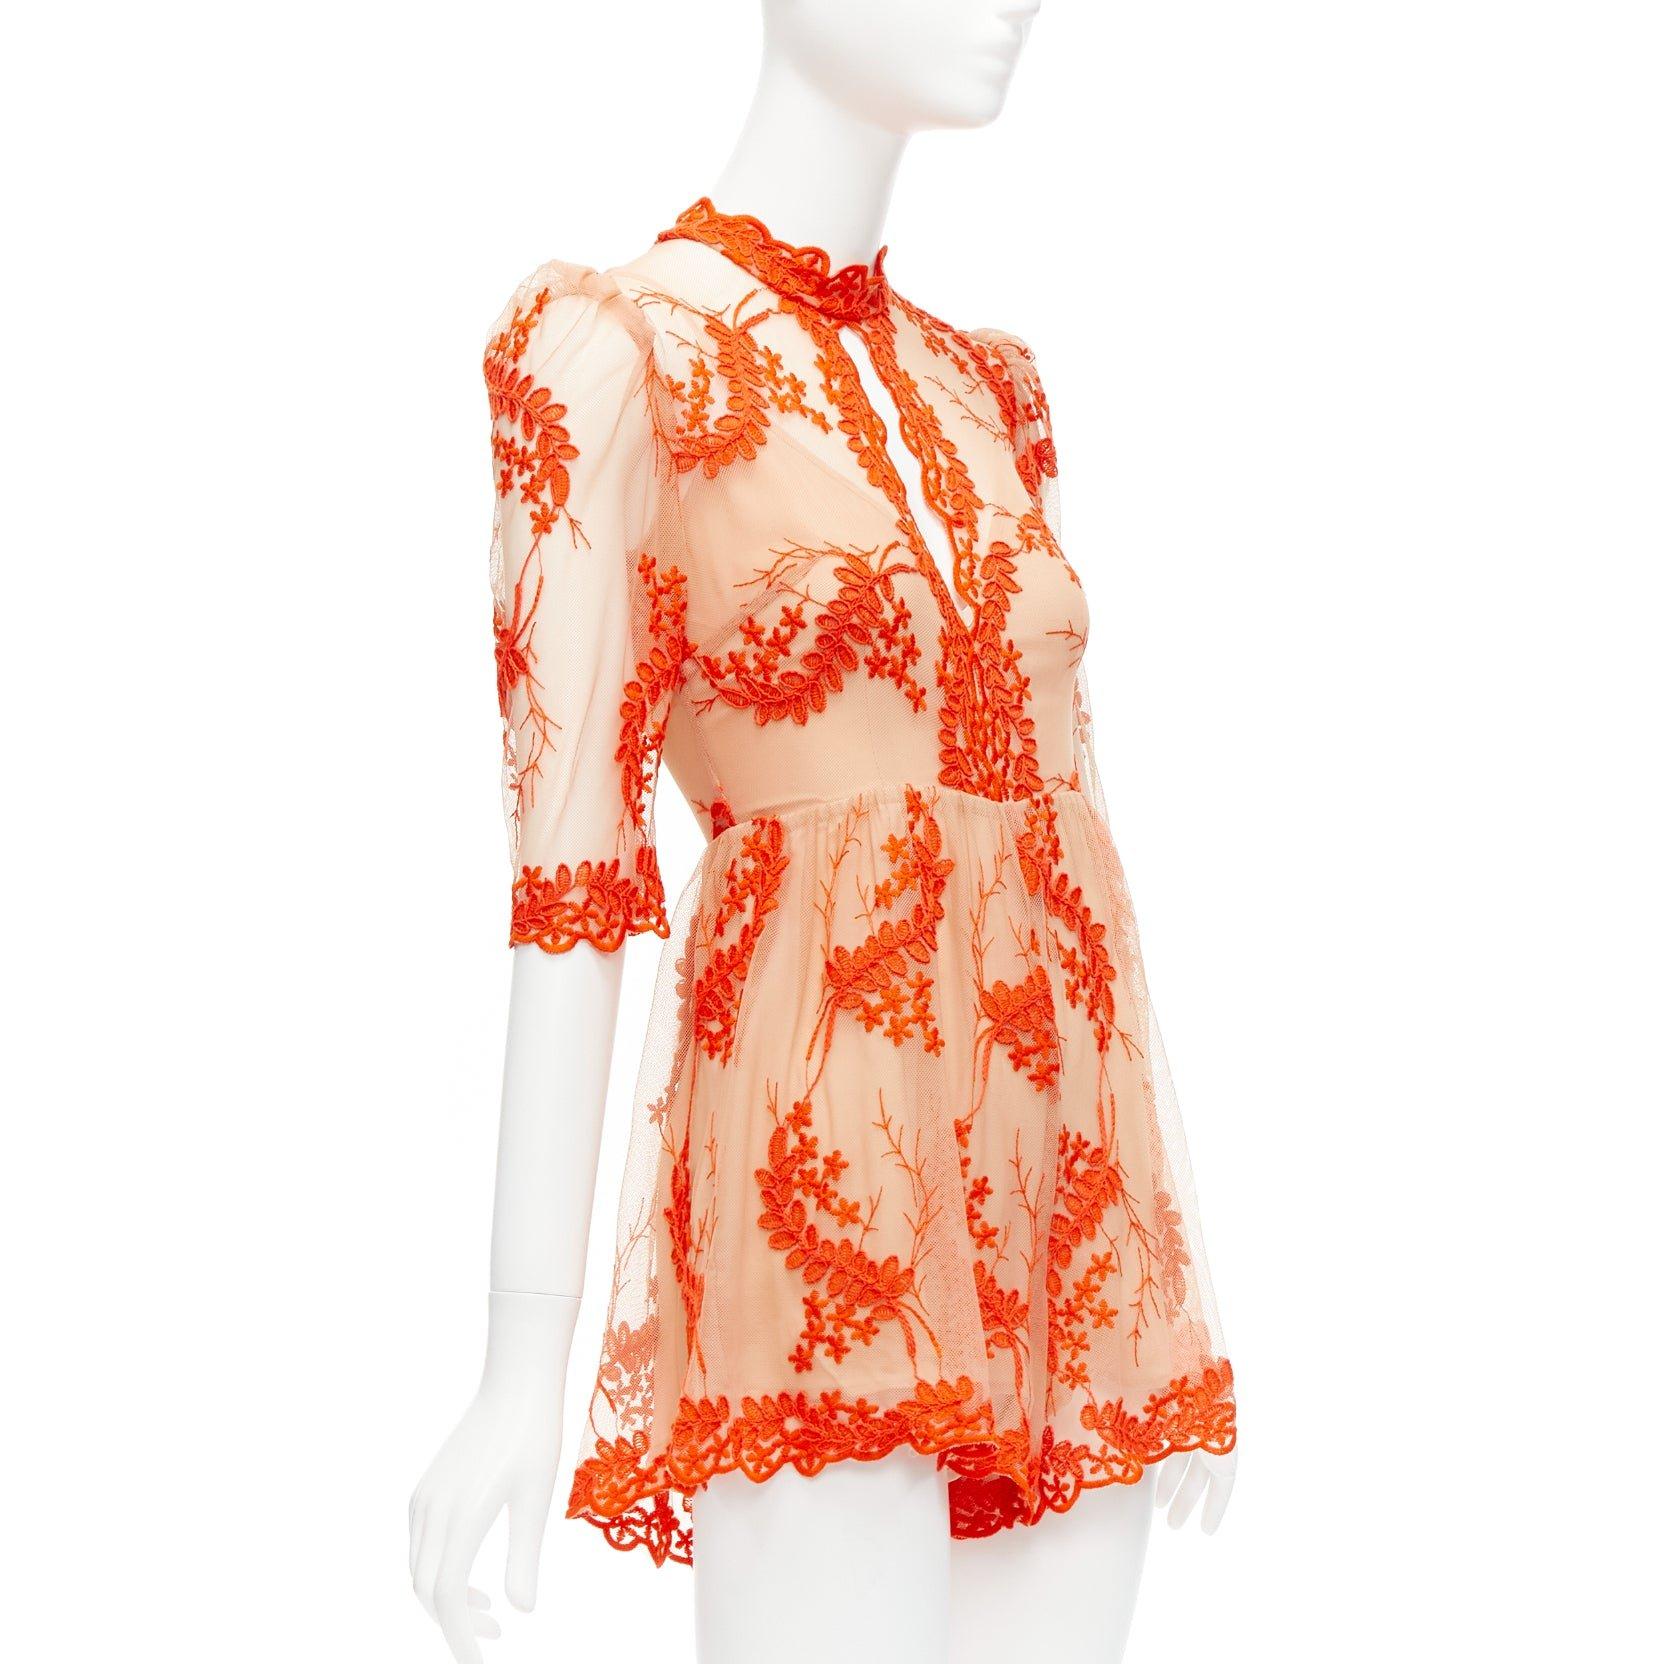 ALICE MCCALL Honeymoon orange lace nude sheer overlay lined romper US6 M
Reference: AAWC/A00568
Brand: Alice McCall
Model: Honeymoon
Collection: AW19
Material: Nylon
Color: Orange, Nude
Pattern: Floral
Closure: Zip
Lining: Nude Fabric
Extra Details: